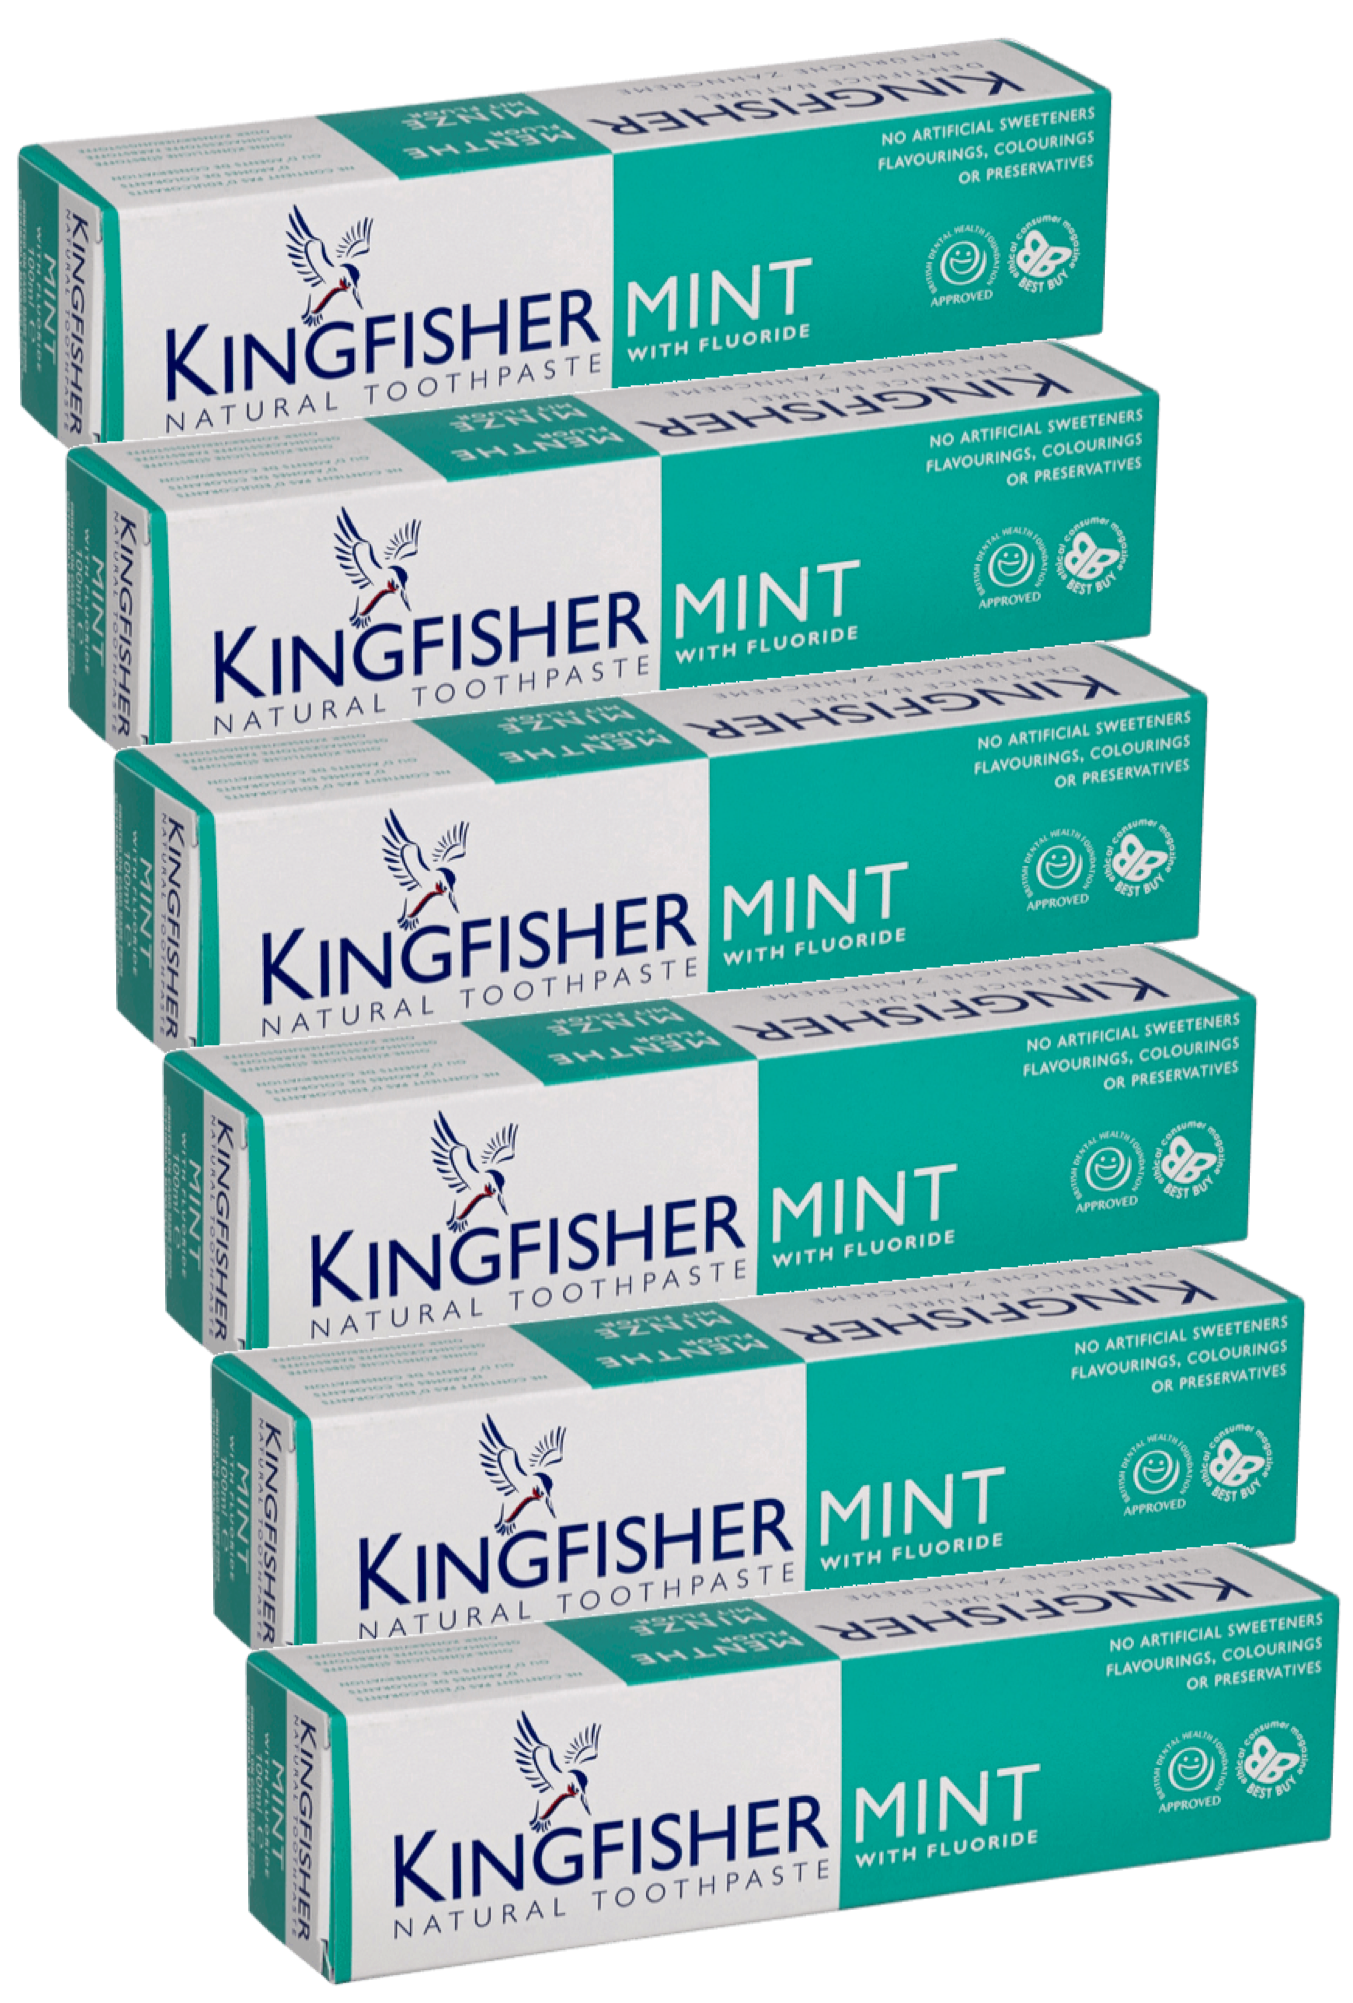 Kingfisher Toothpaste - Mint with Fluoride Toothpaste (100ml) - Pack of 6